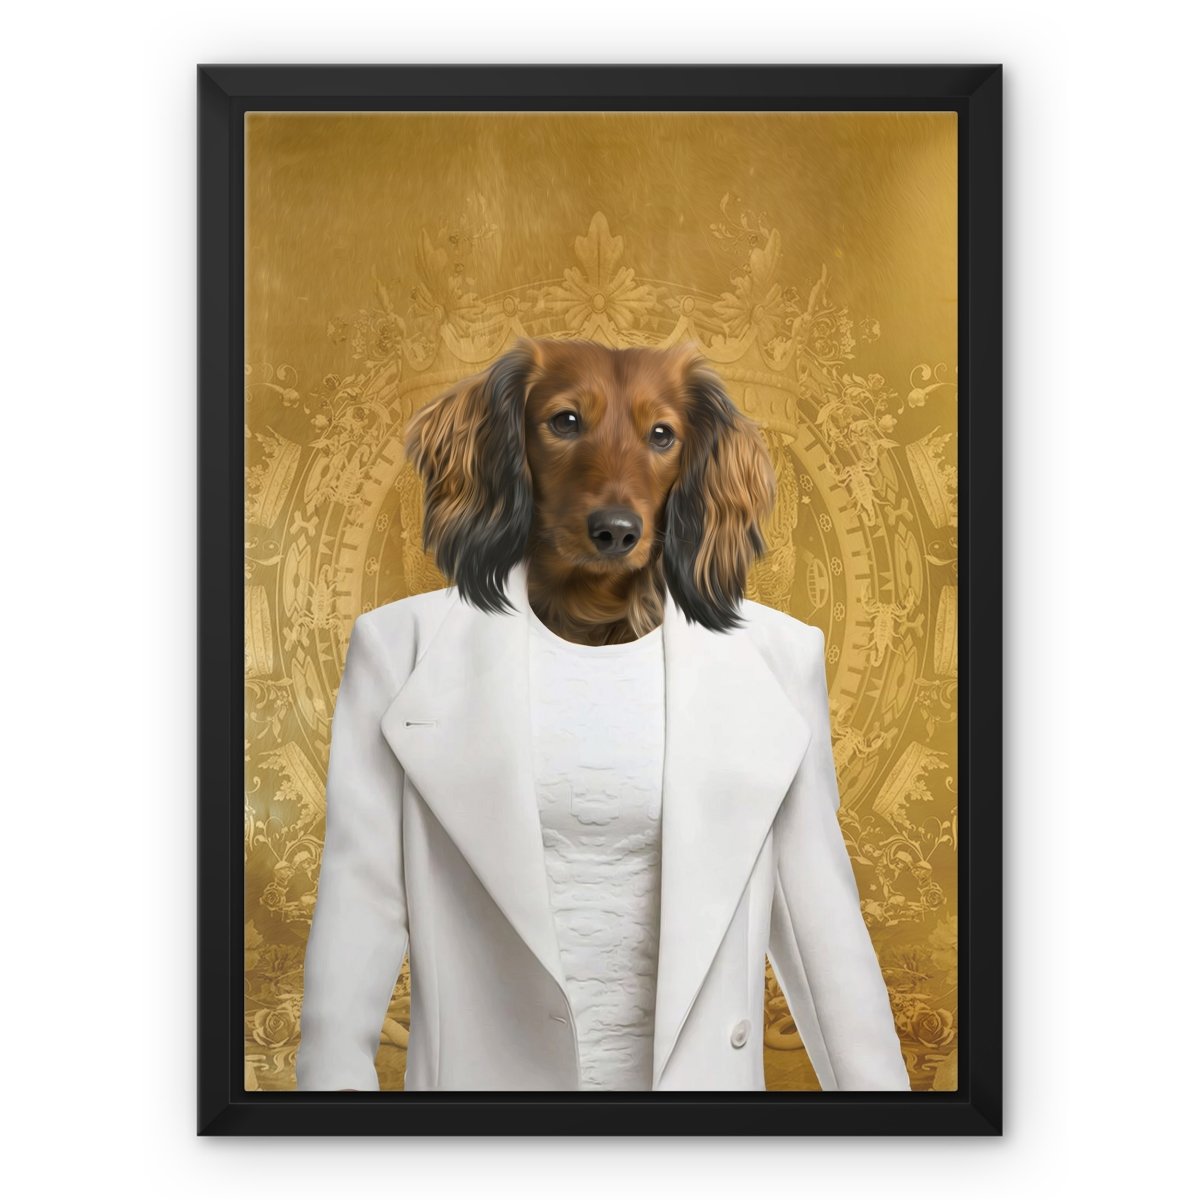 Queen Of The South: Custom Pet Canvas - Paw & Glory - #pet portraits# - #dog portraits# - #pet portraits uk#paw & glory, custom pet portrait canvas,my pet canvas blanket, pet on canvas reviews, personalized dog and owner canvas uk, pet canvas uk, pet canvas portrait, the pet on canvas